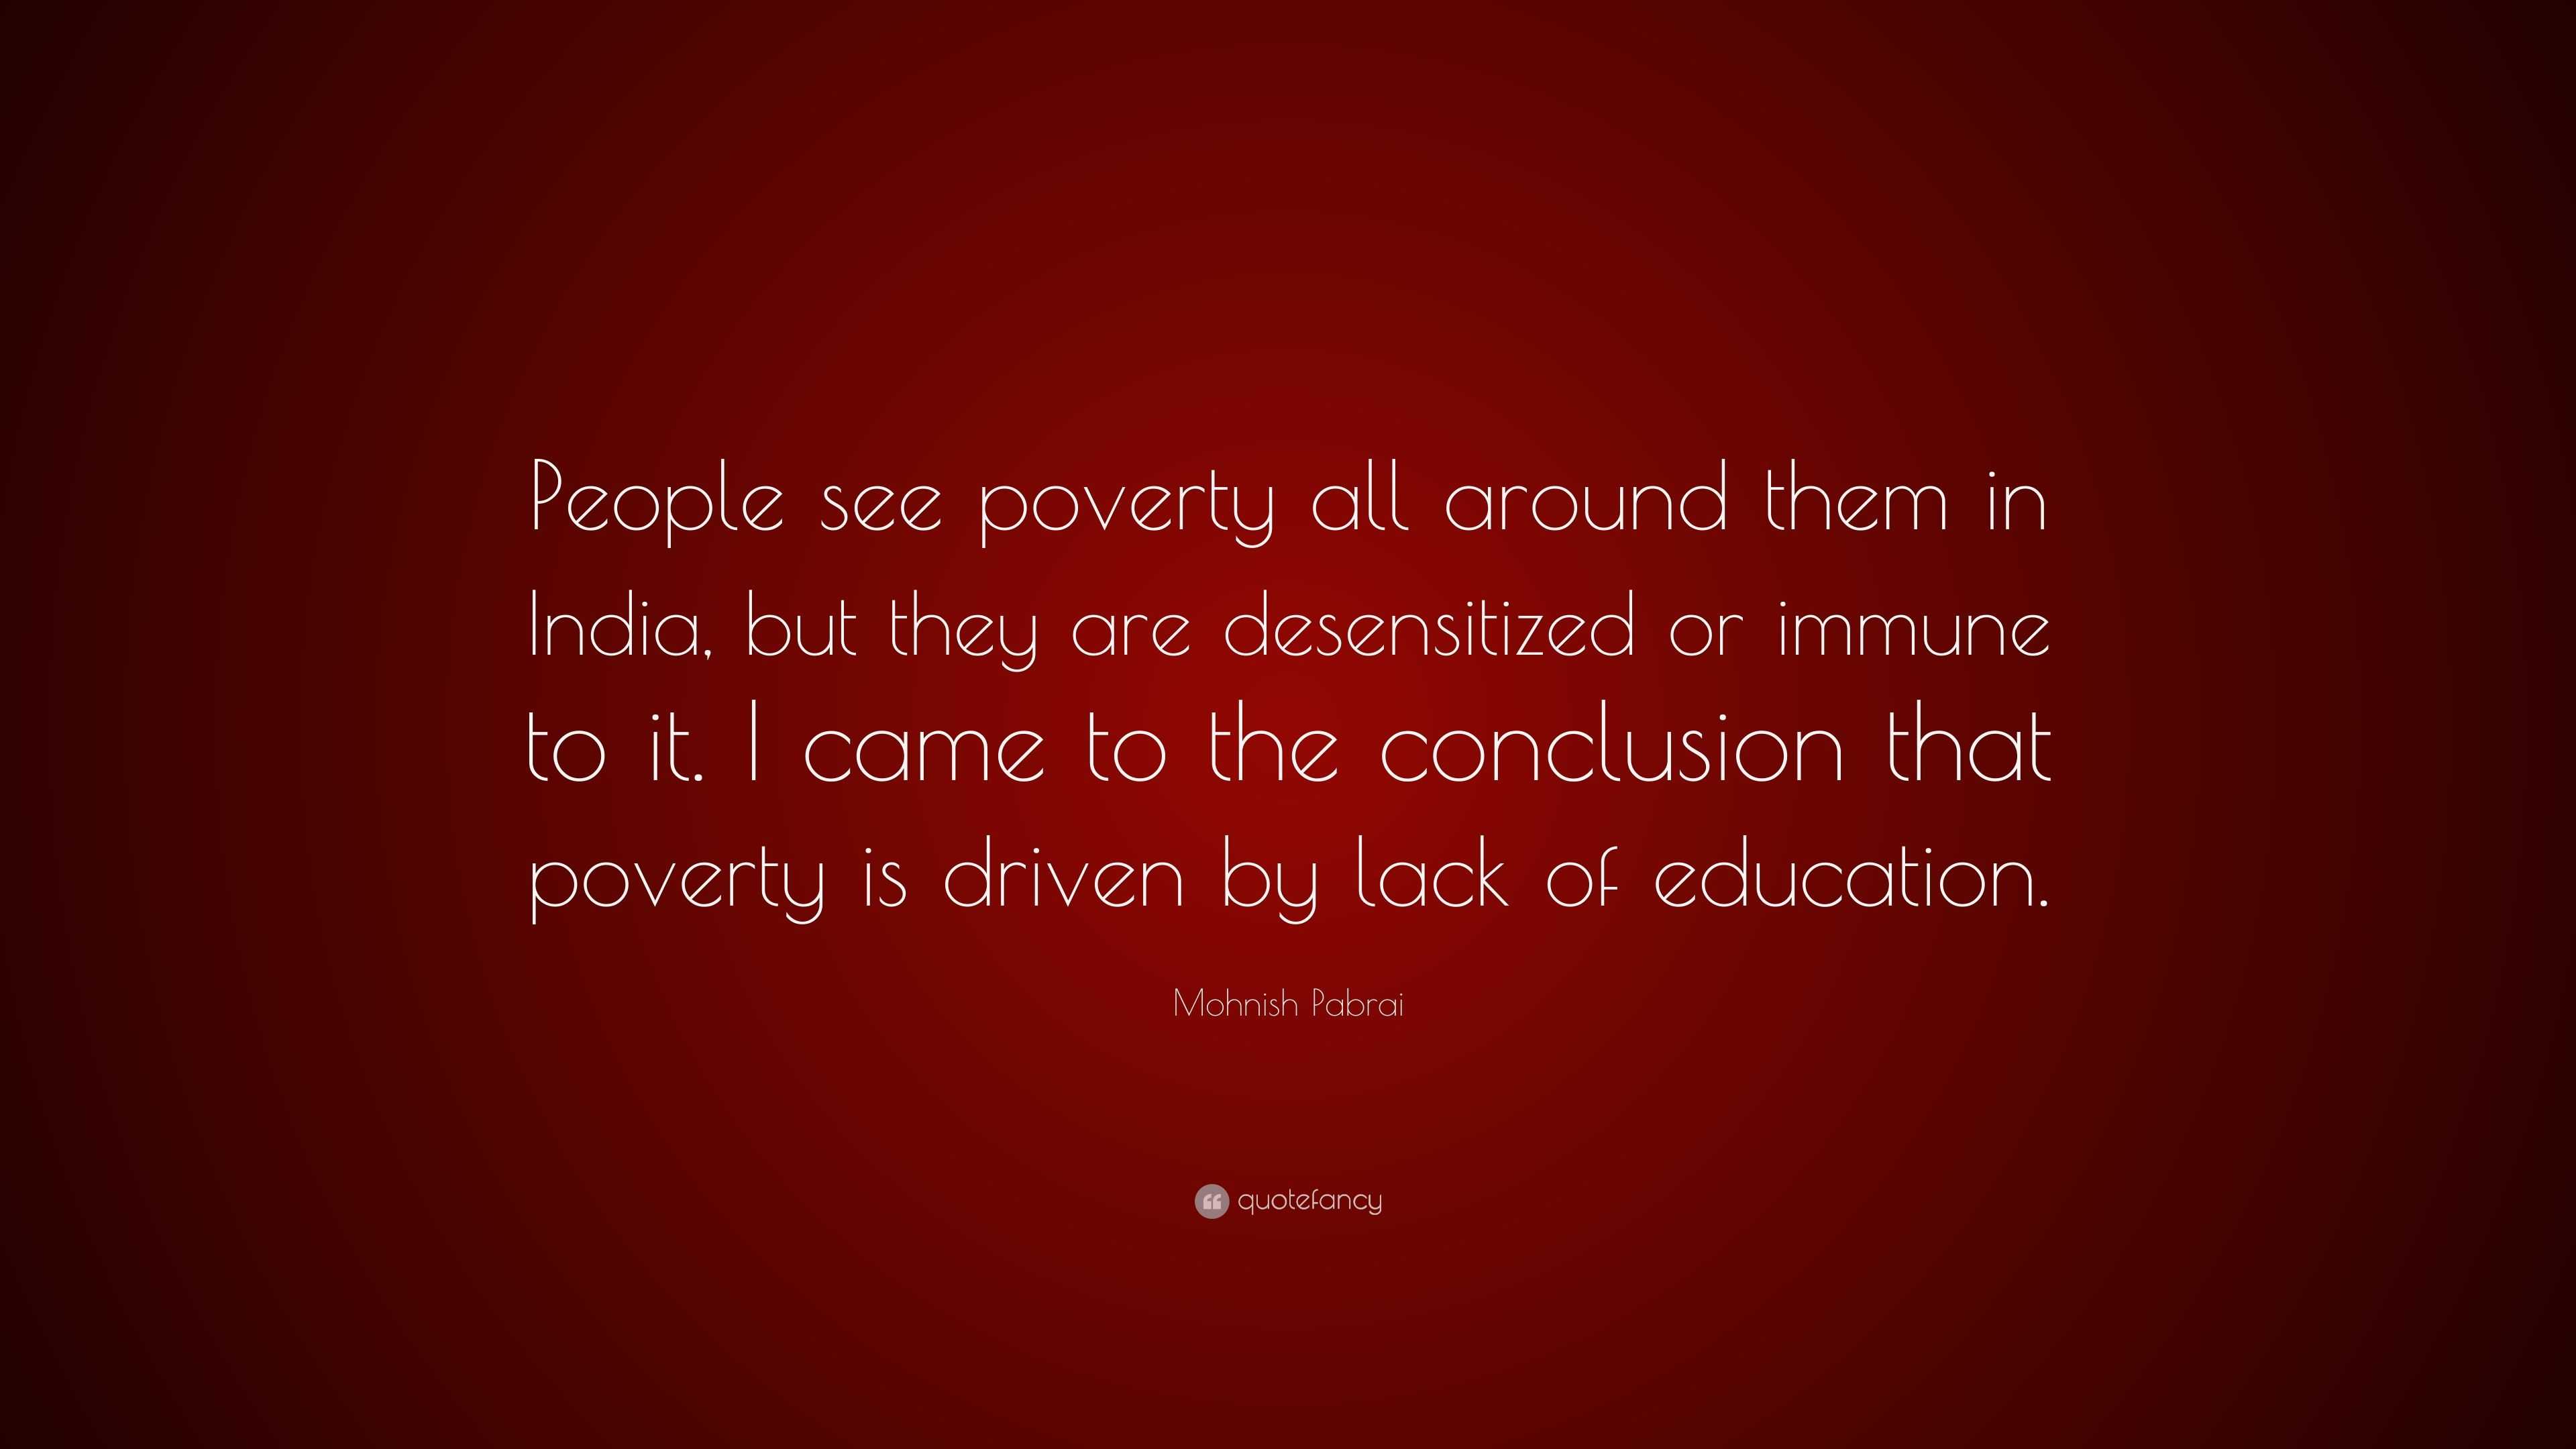 Mohnish Pabrai Quote: "People see poverty all around them ...